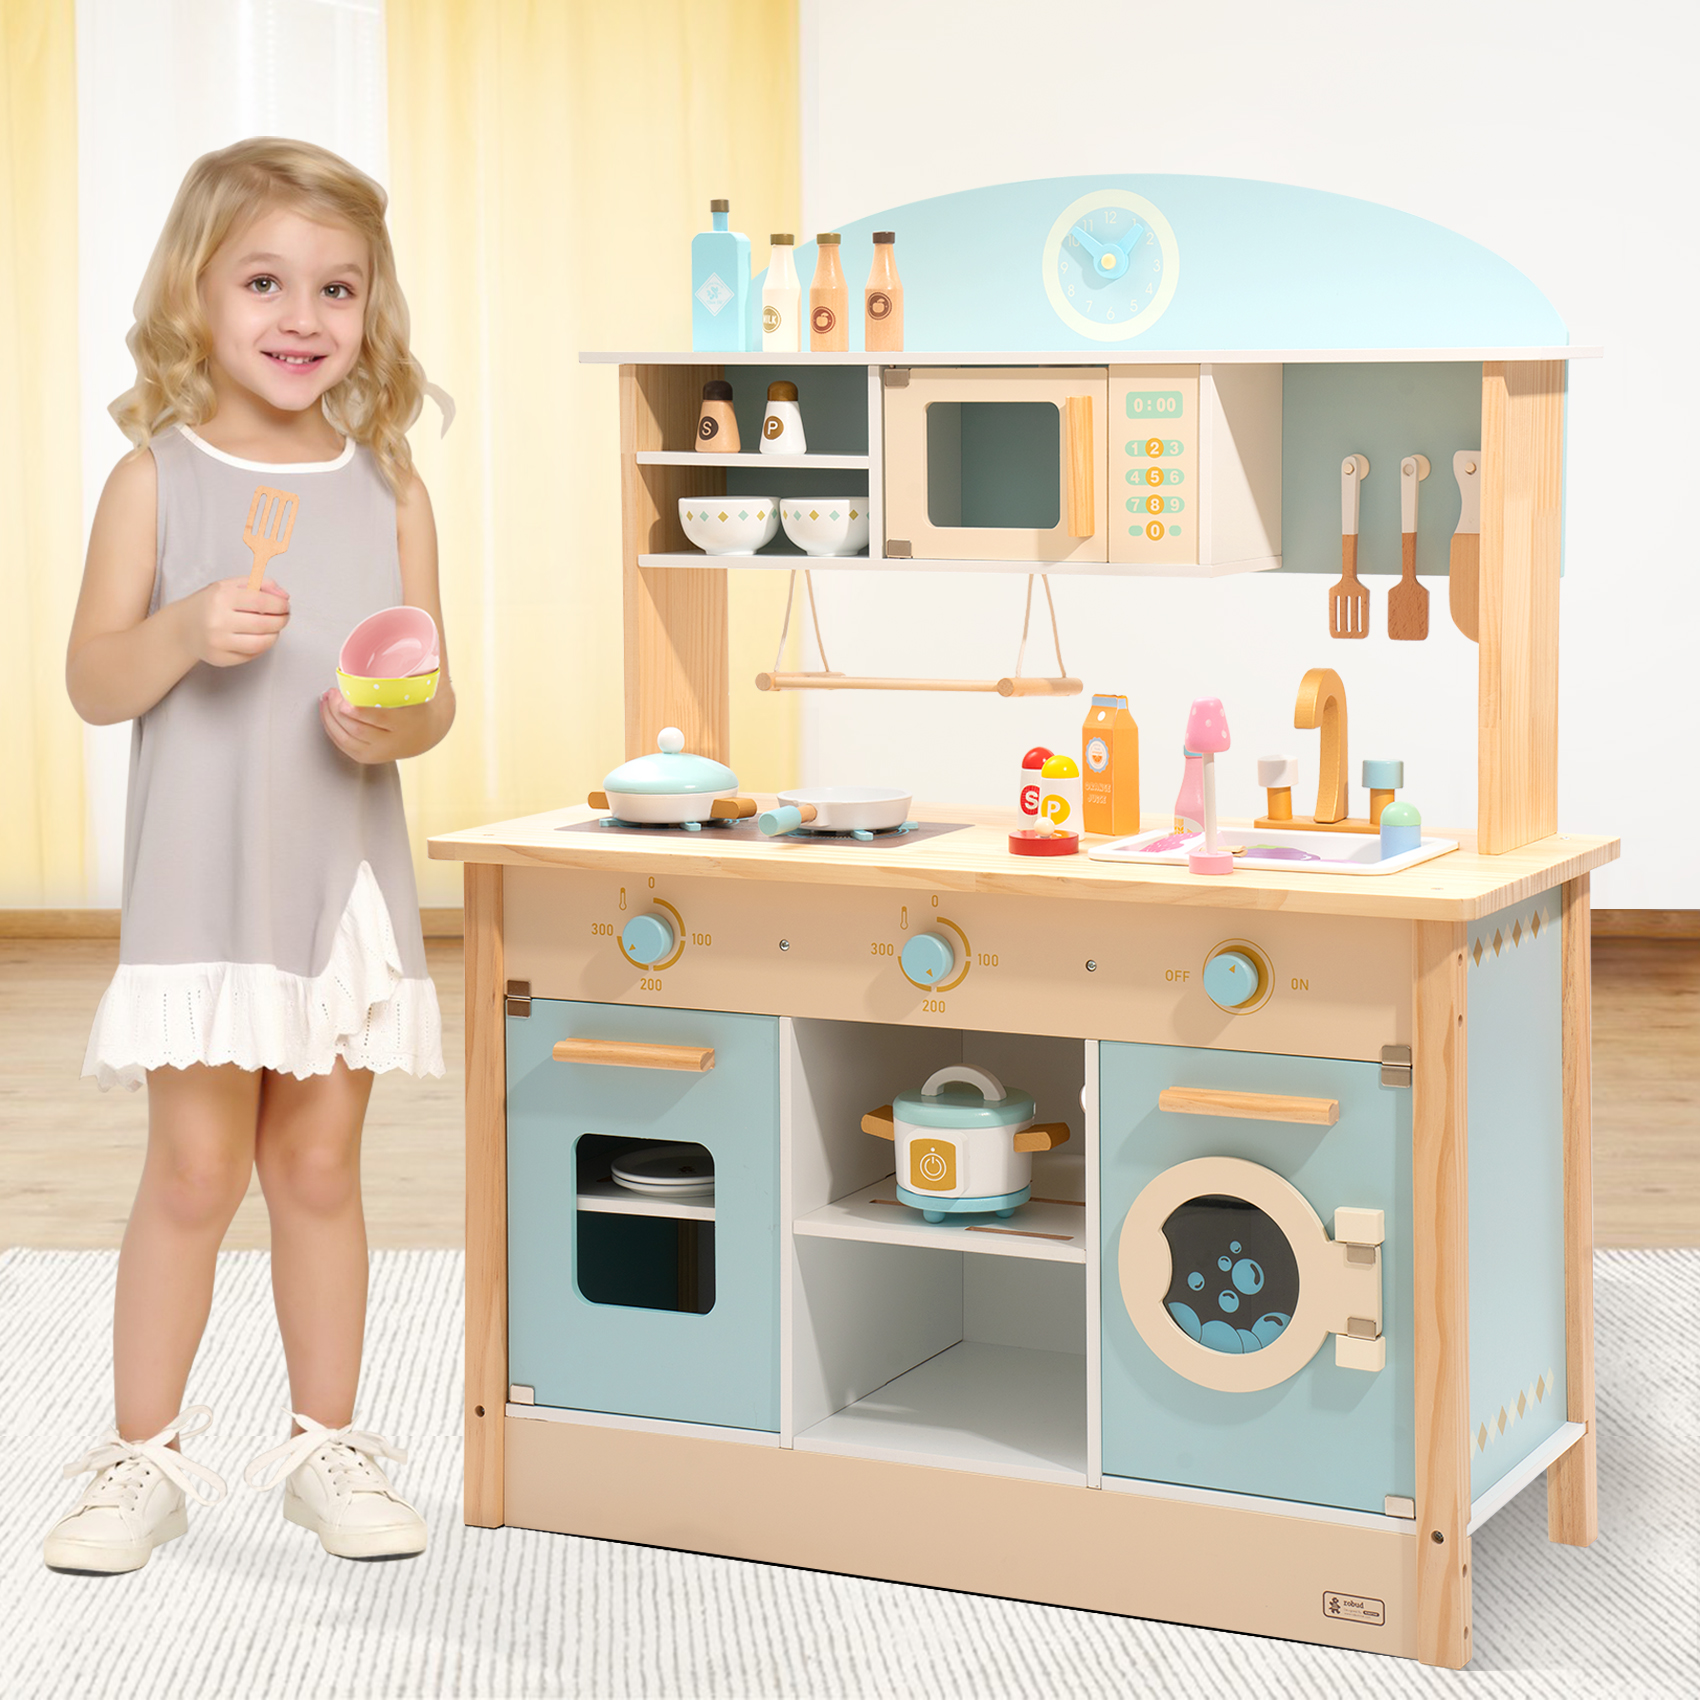 Wooden Kitchen Playset with Washing machine and microwave,S-Boyel Living